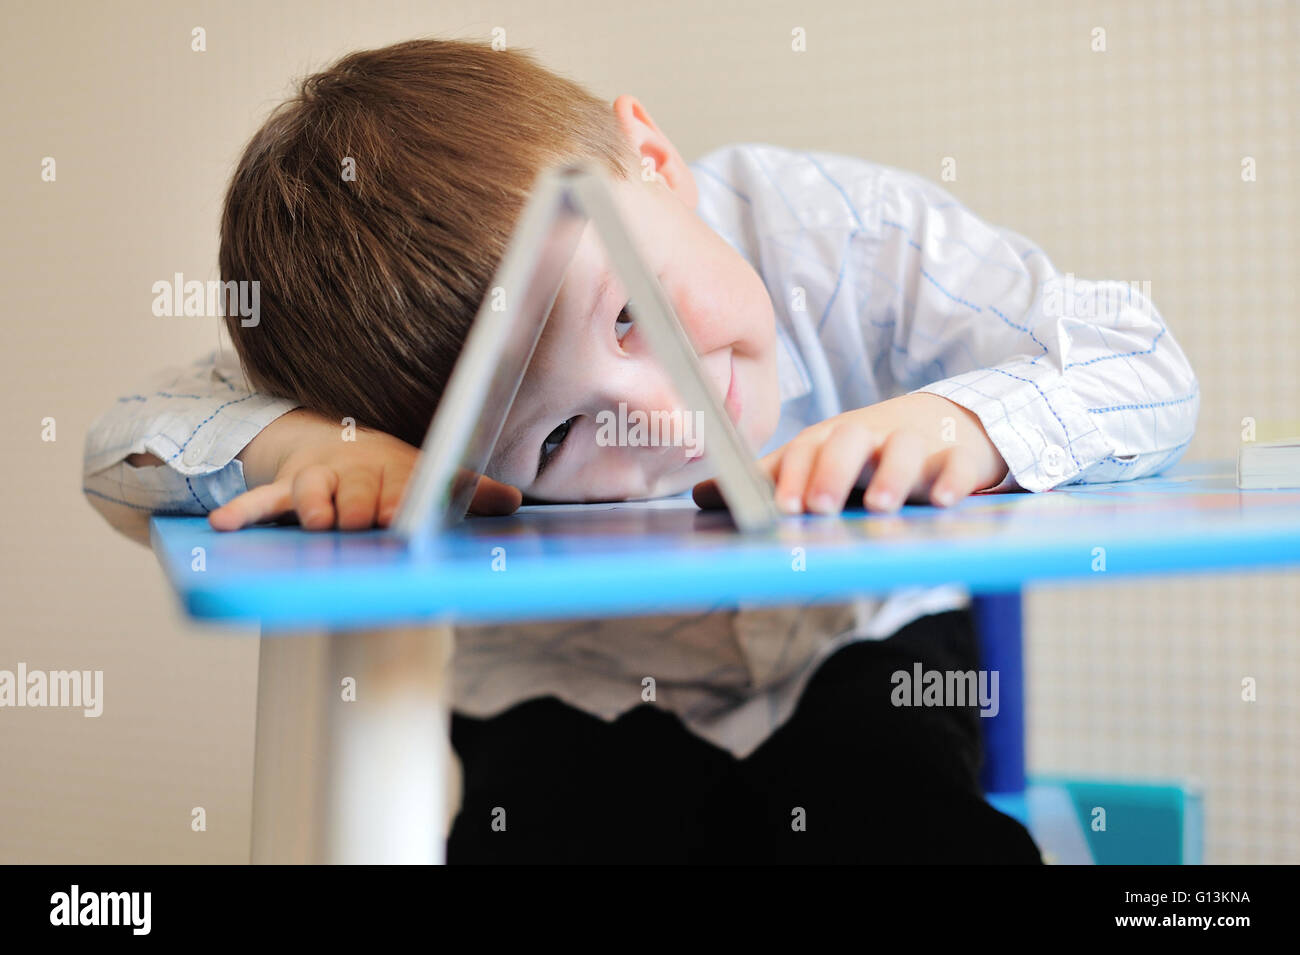 Young schoolboy playing with books and smiling as he sits at his desk in classroom Stock Photo